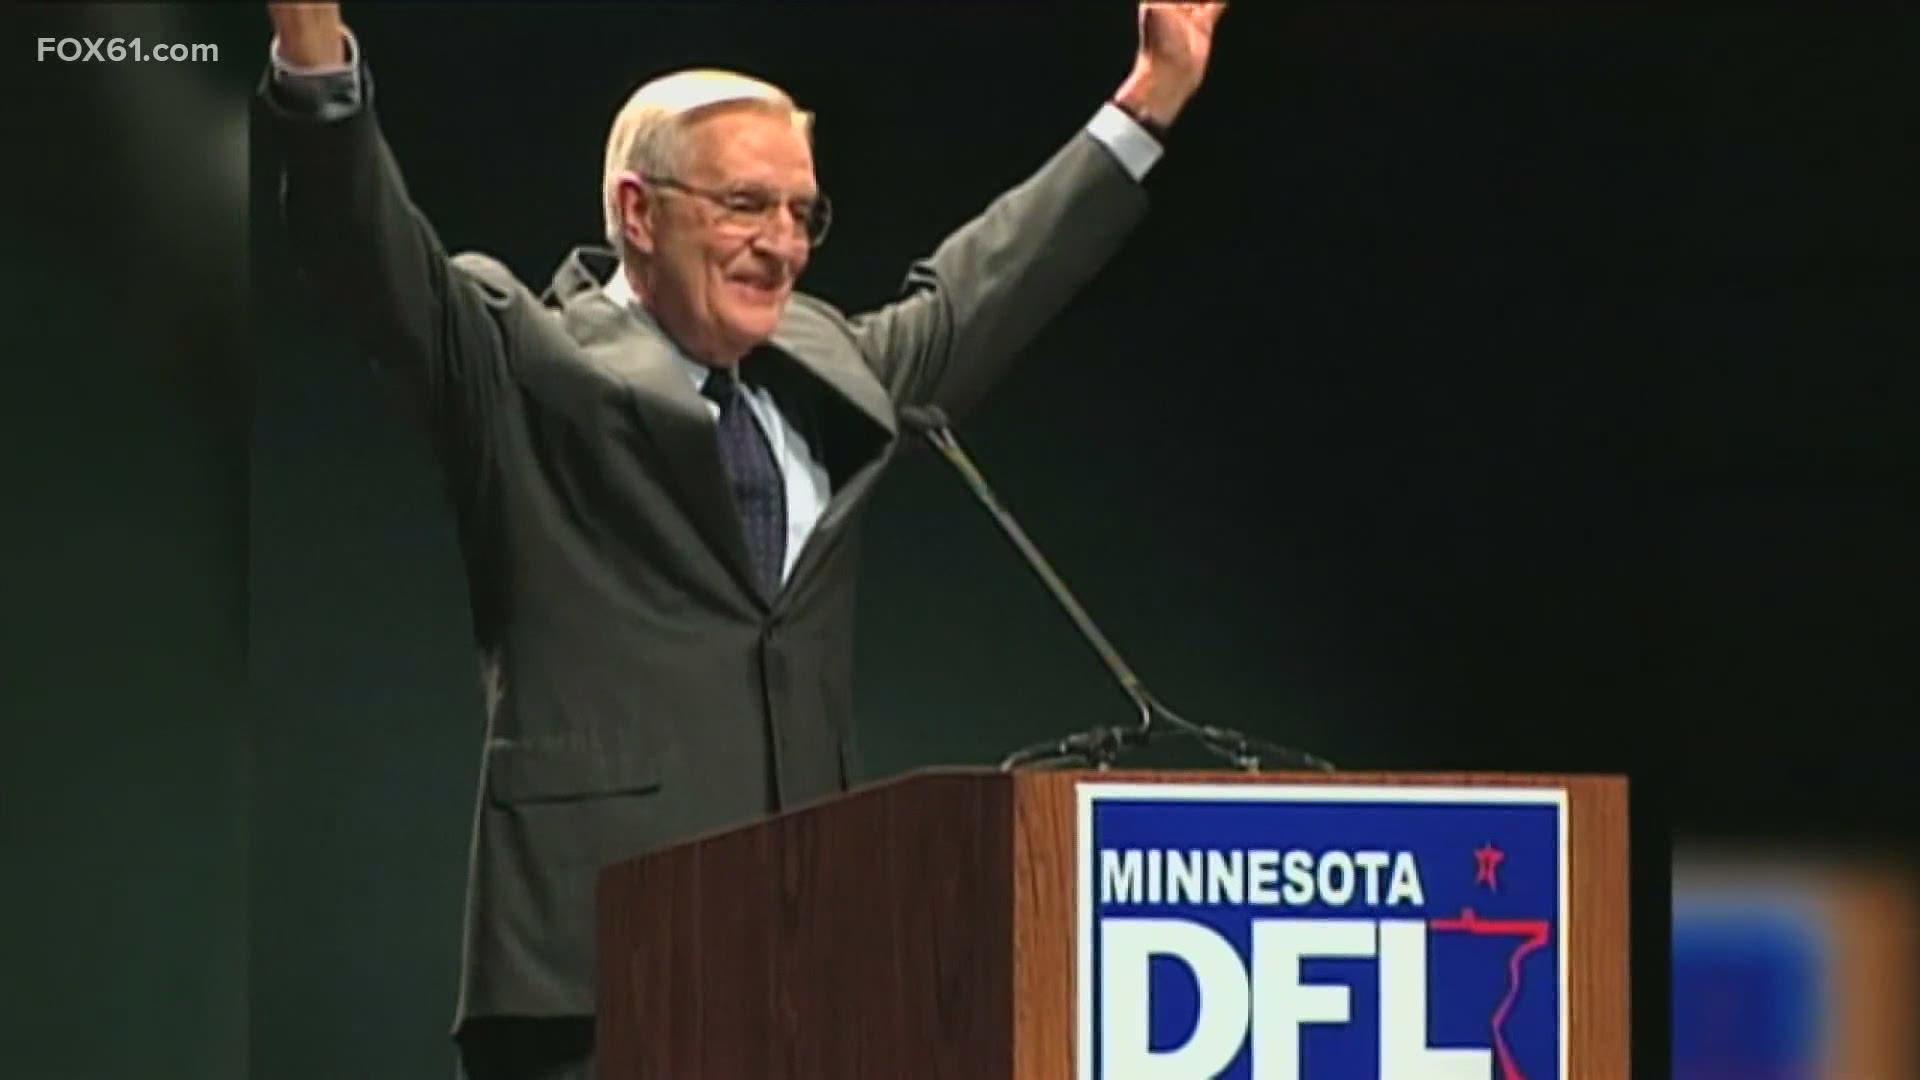 Mondale, a liberal icon, died Monday at the age of 93